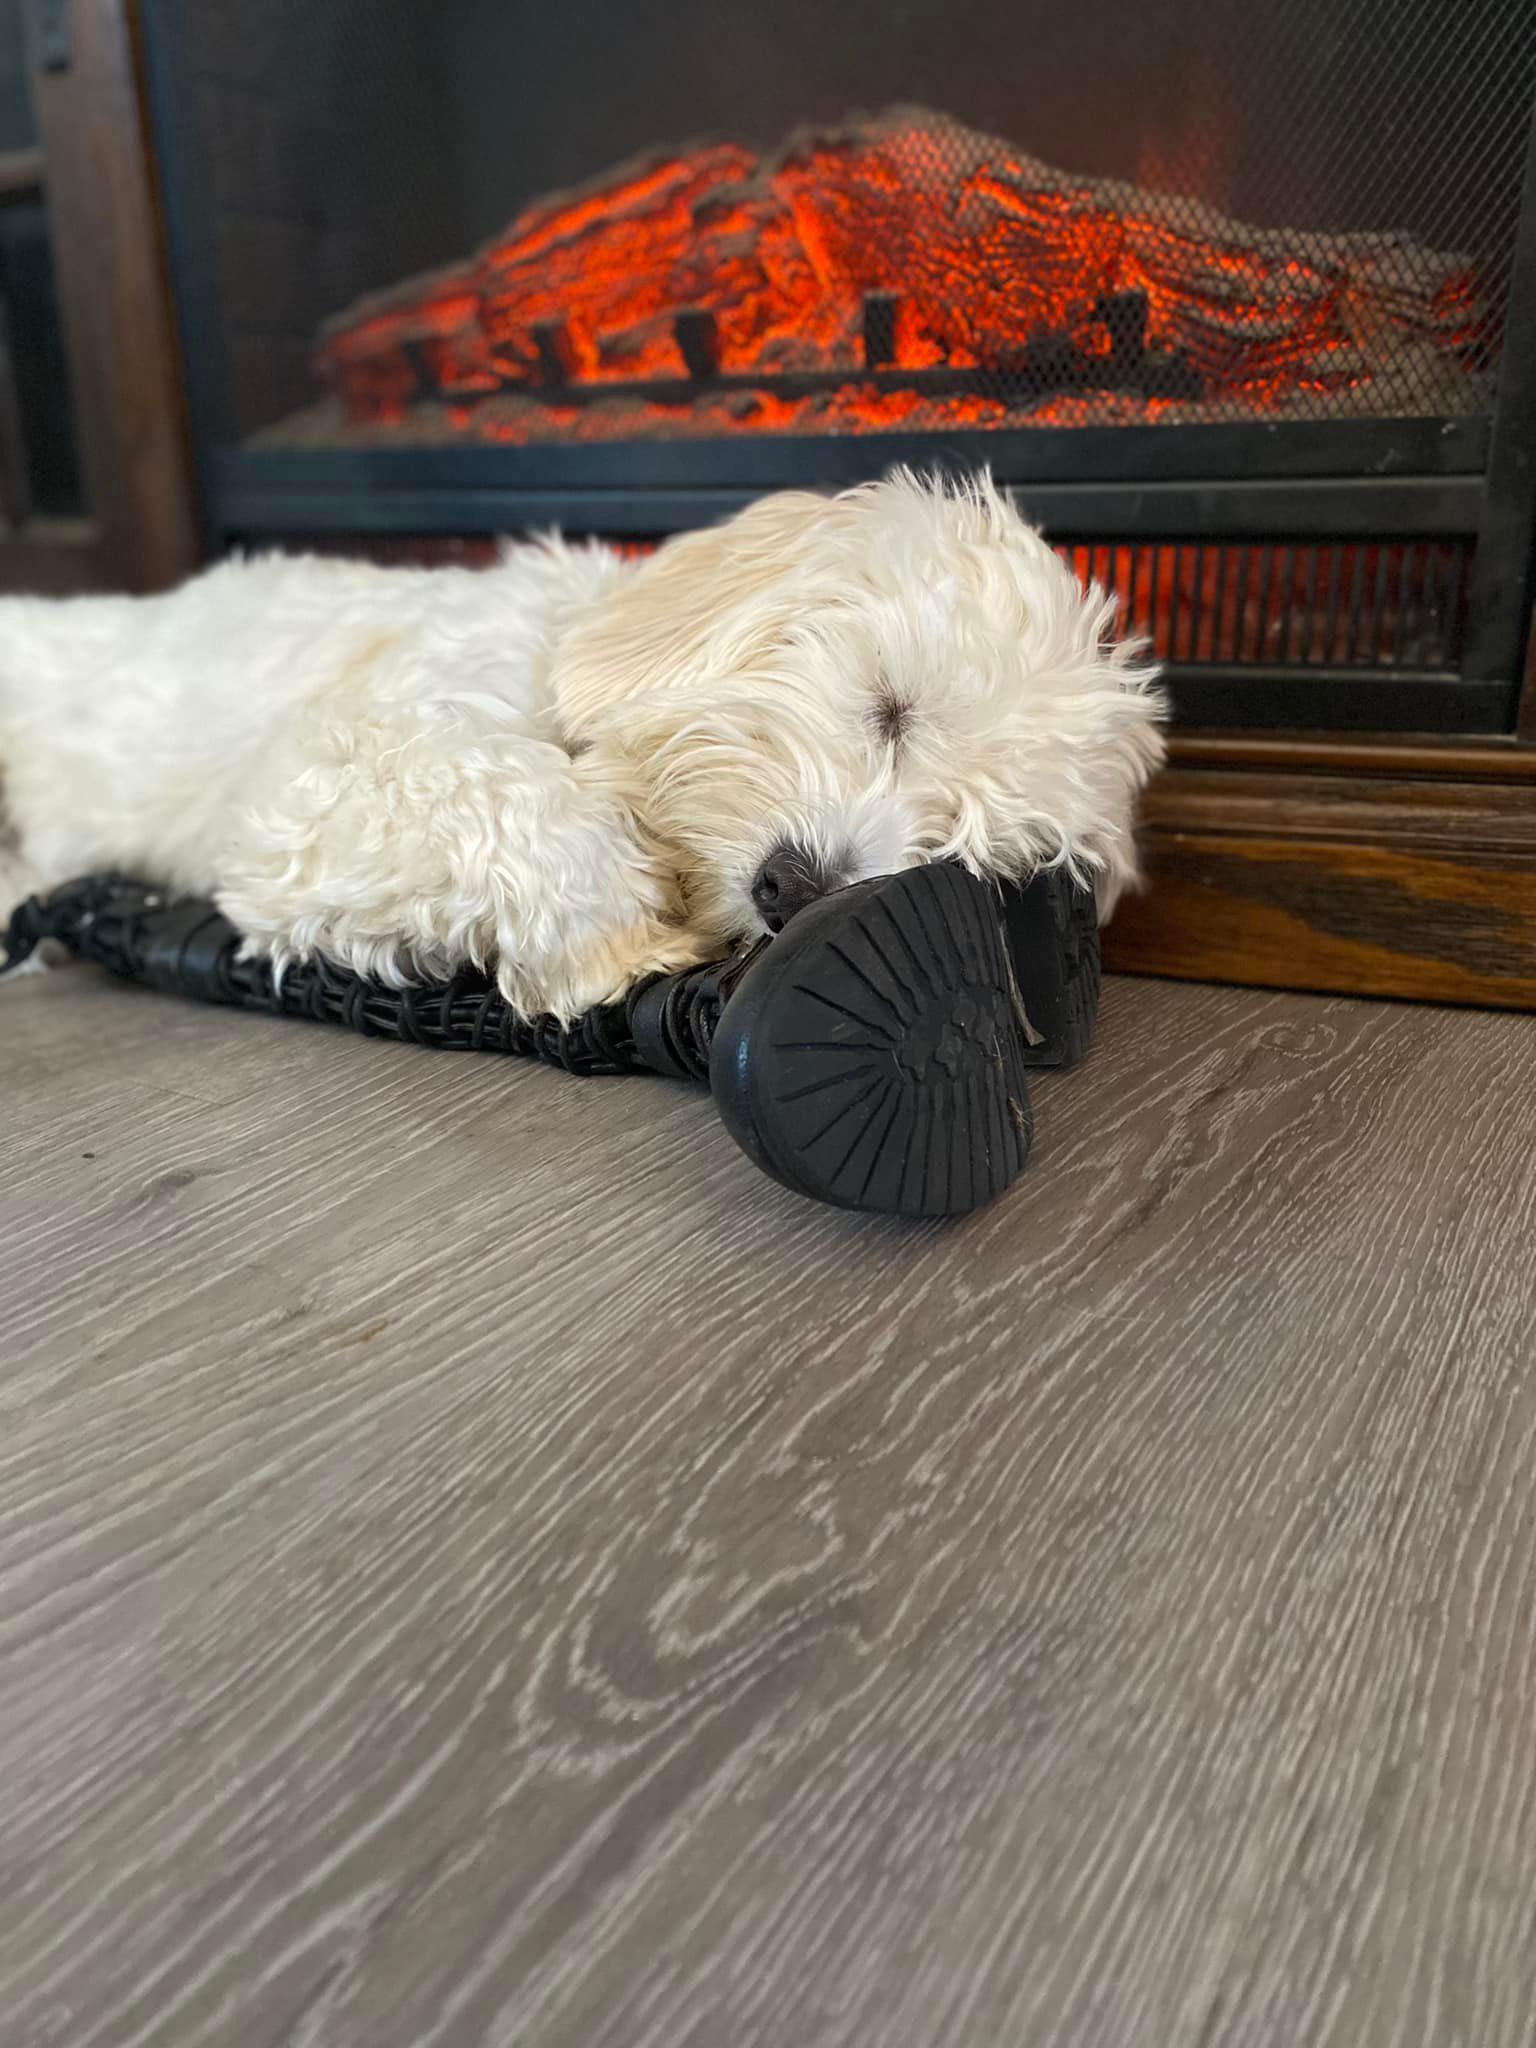 Frankie had a hard time training, nap time in front of the fire it is!